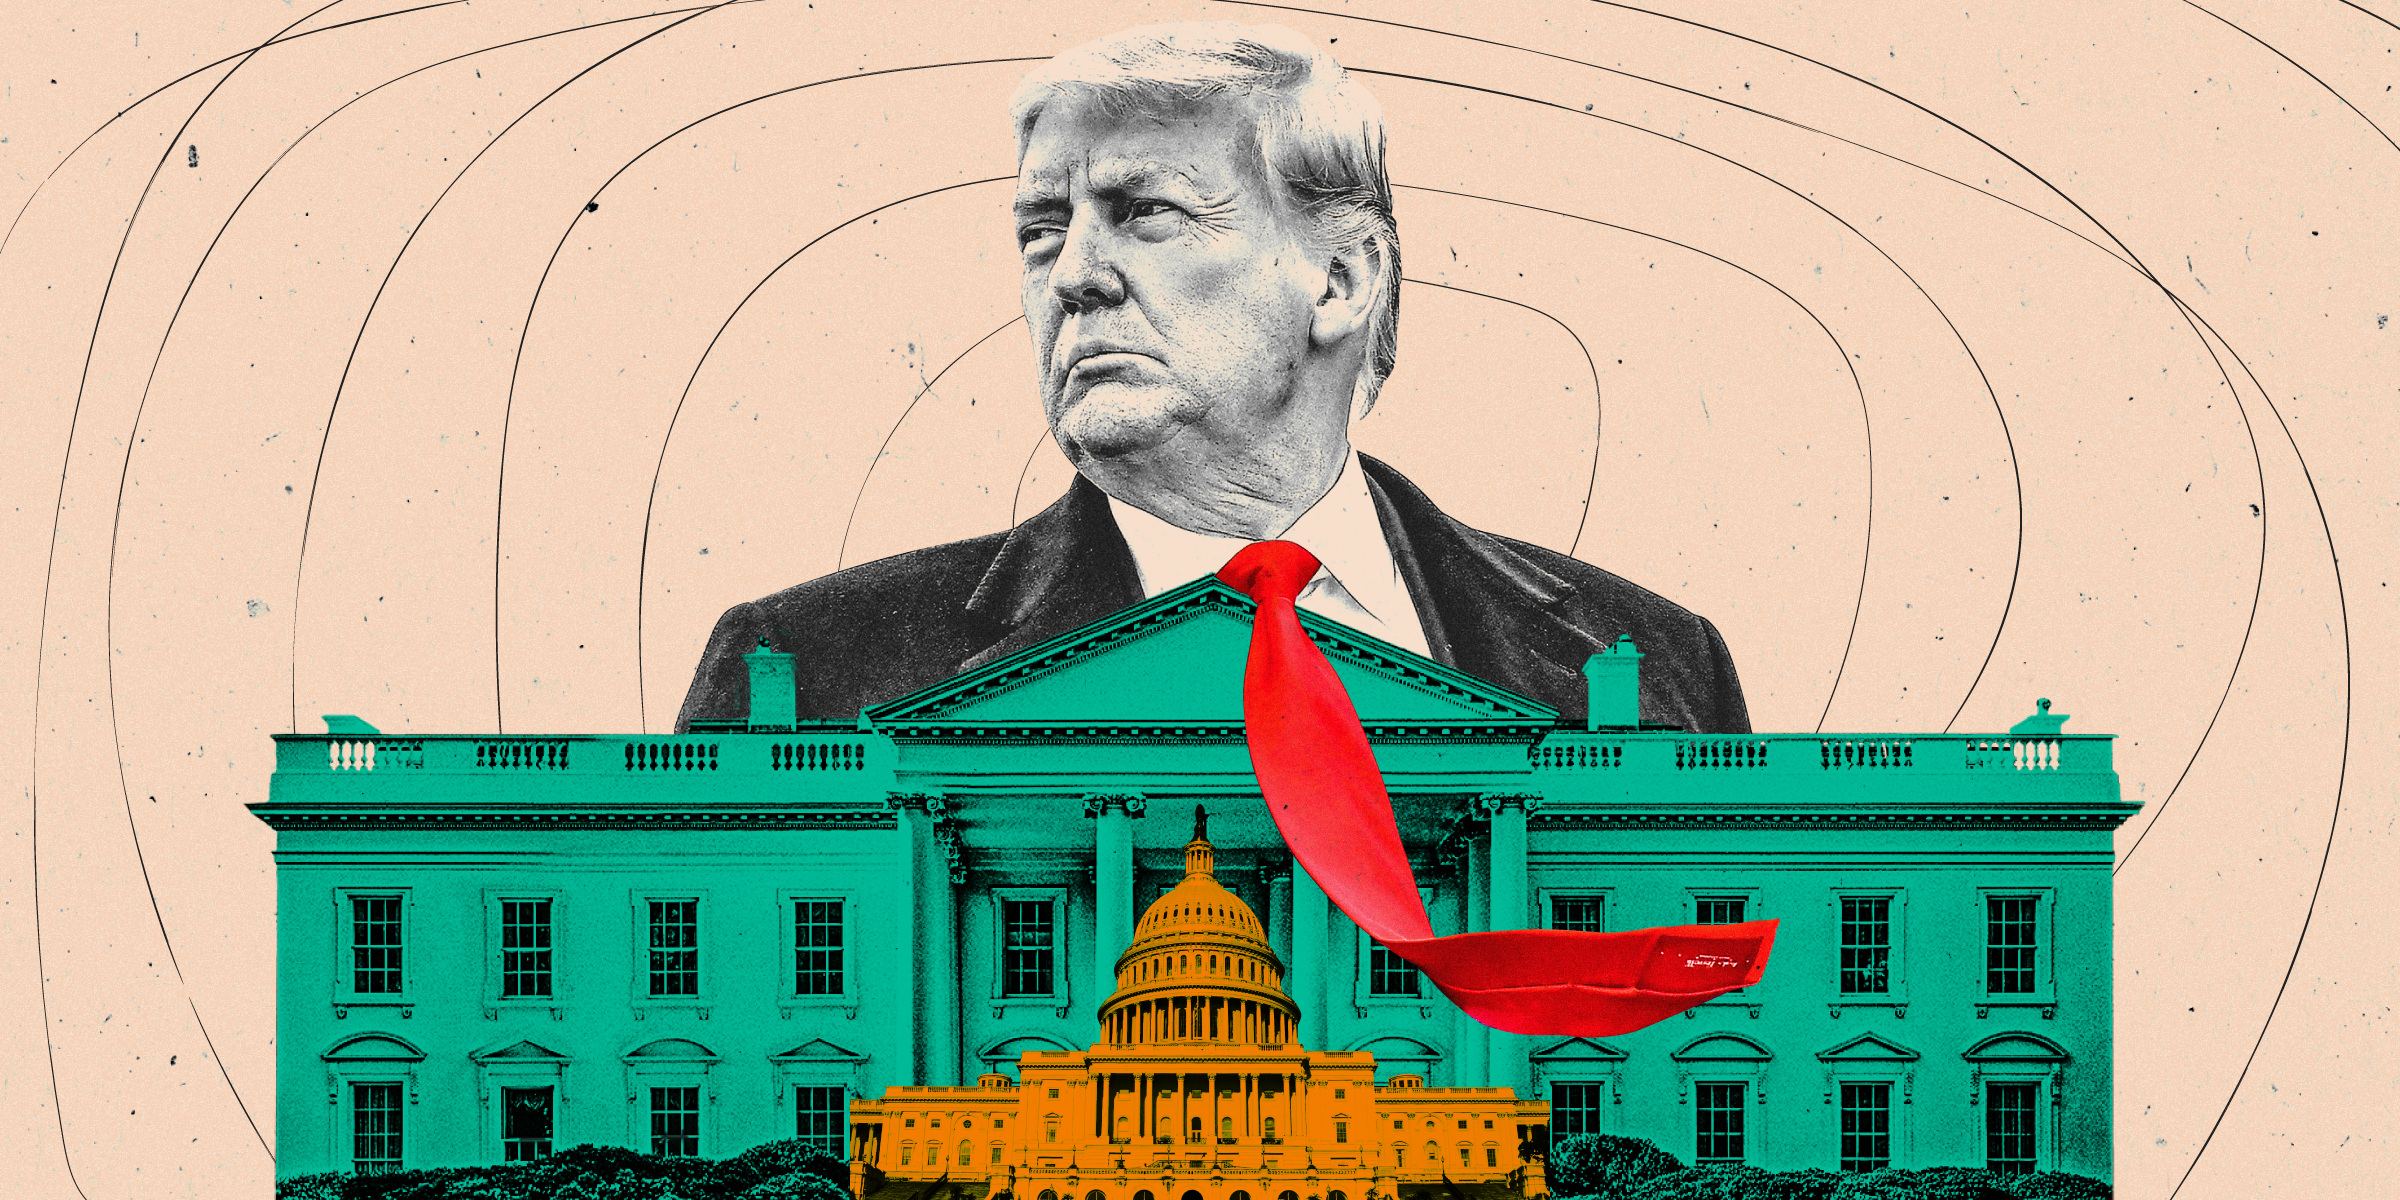 Donald Trump with his red tie flapping in the wind looming over a small green colored White House and a smaller orange colored Capitol Building on a light peach colored background.